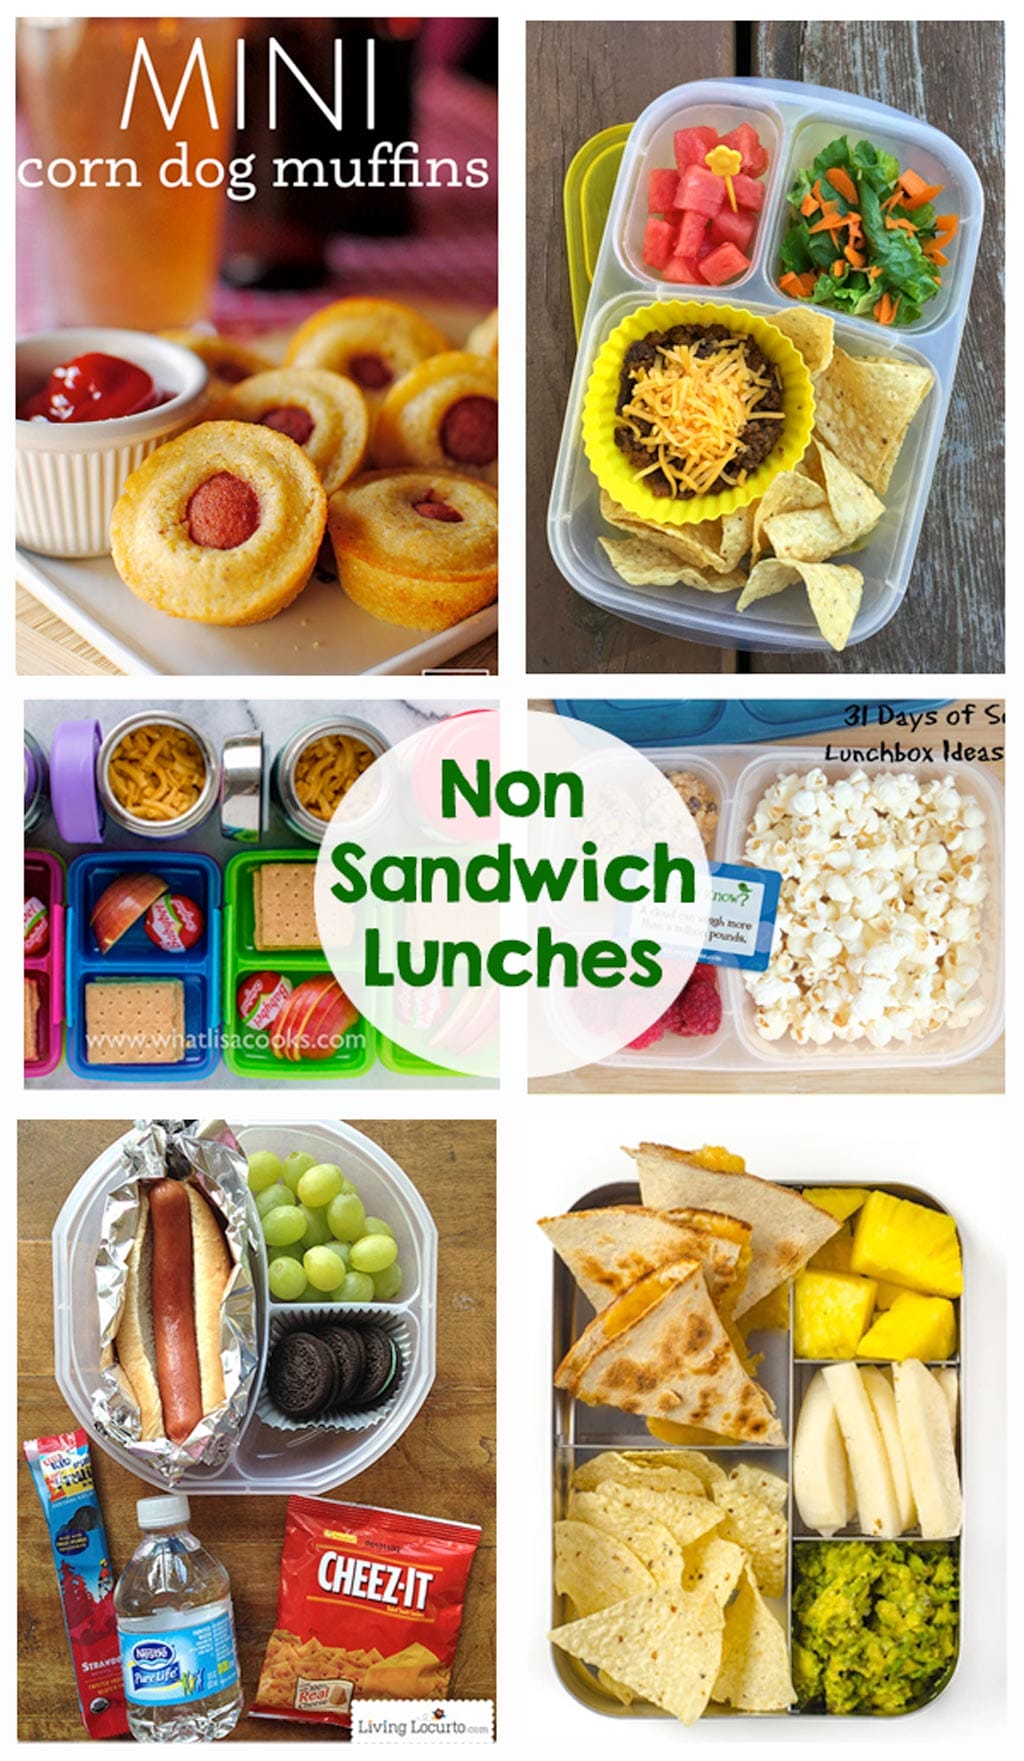 Non Sandwich Lunch Ideas - So many great school lunch ideas in this post! Hot dogs, quesadillas, mini corn dogs, mac and cheese, taco salad... yum!